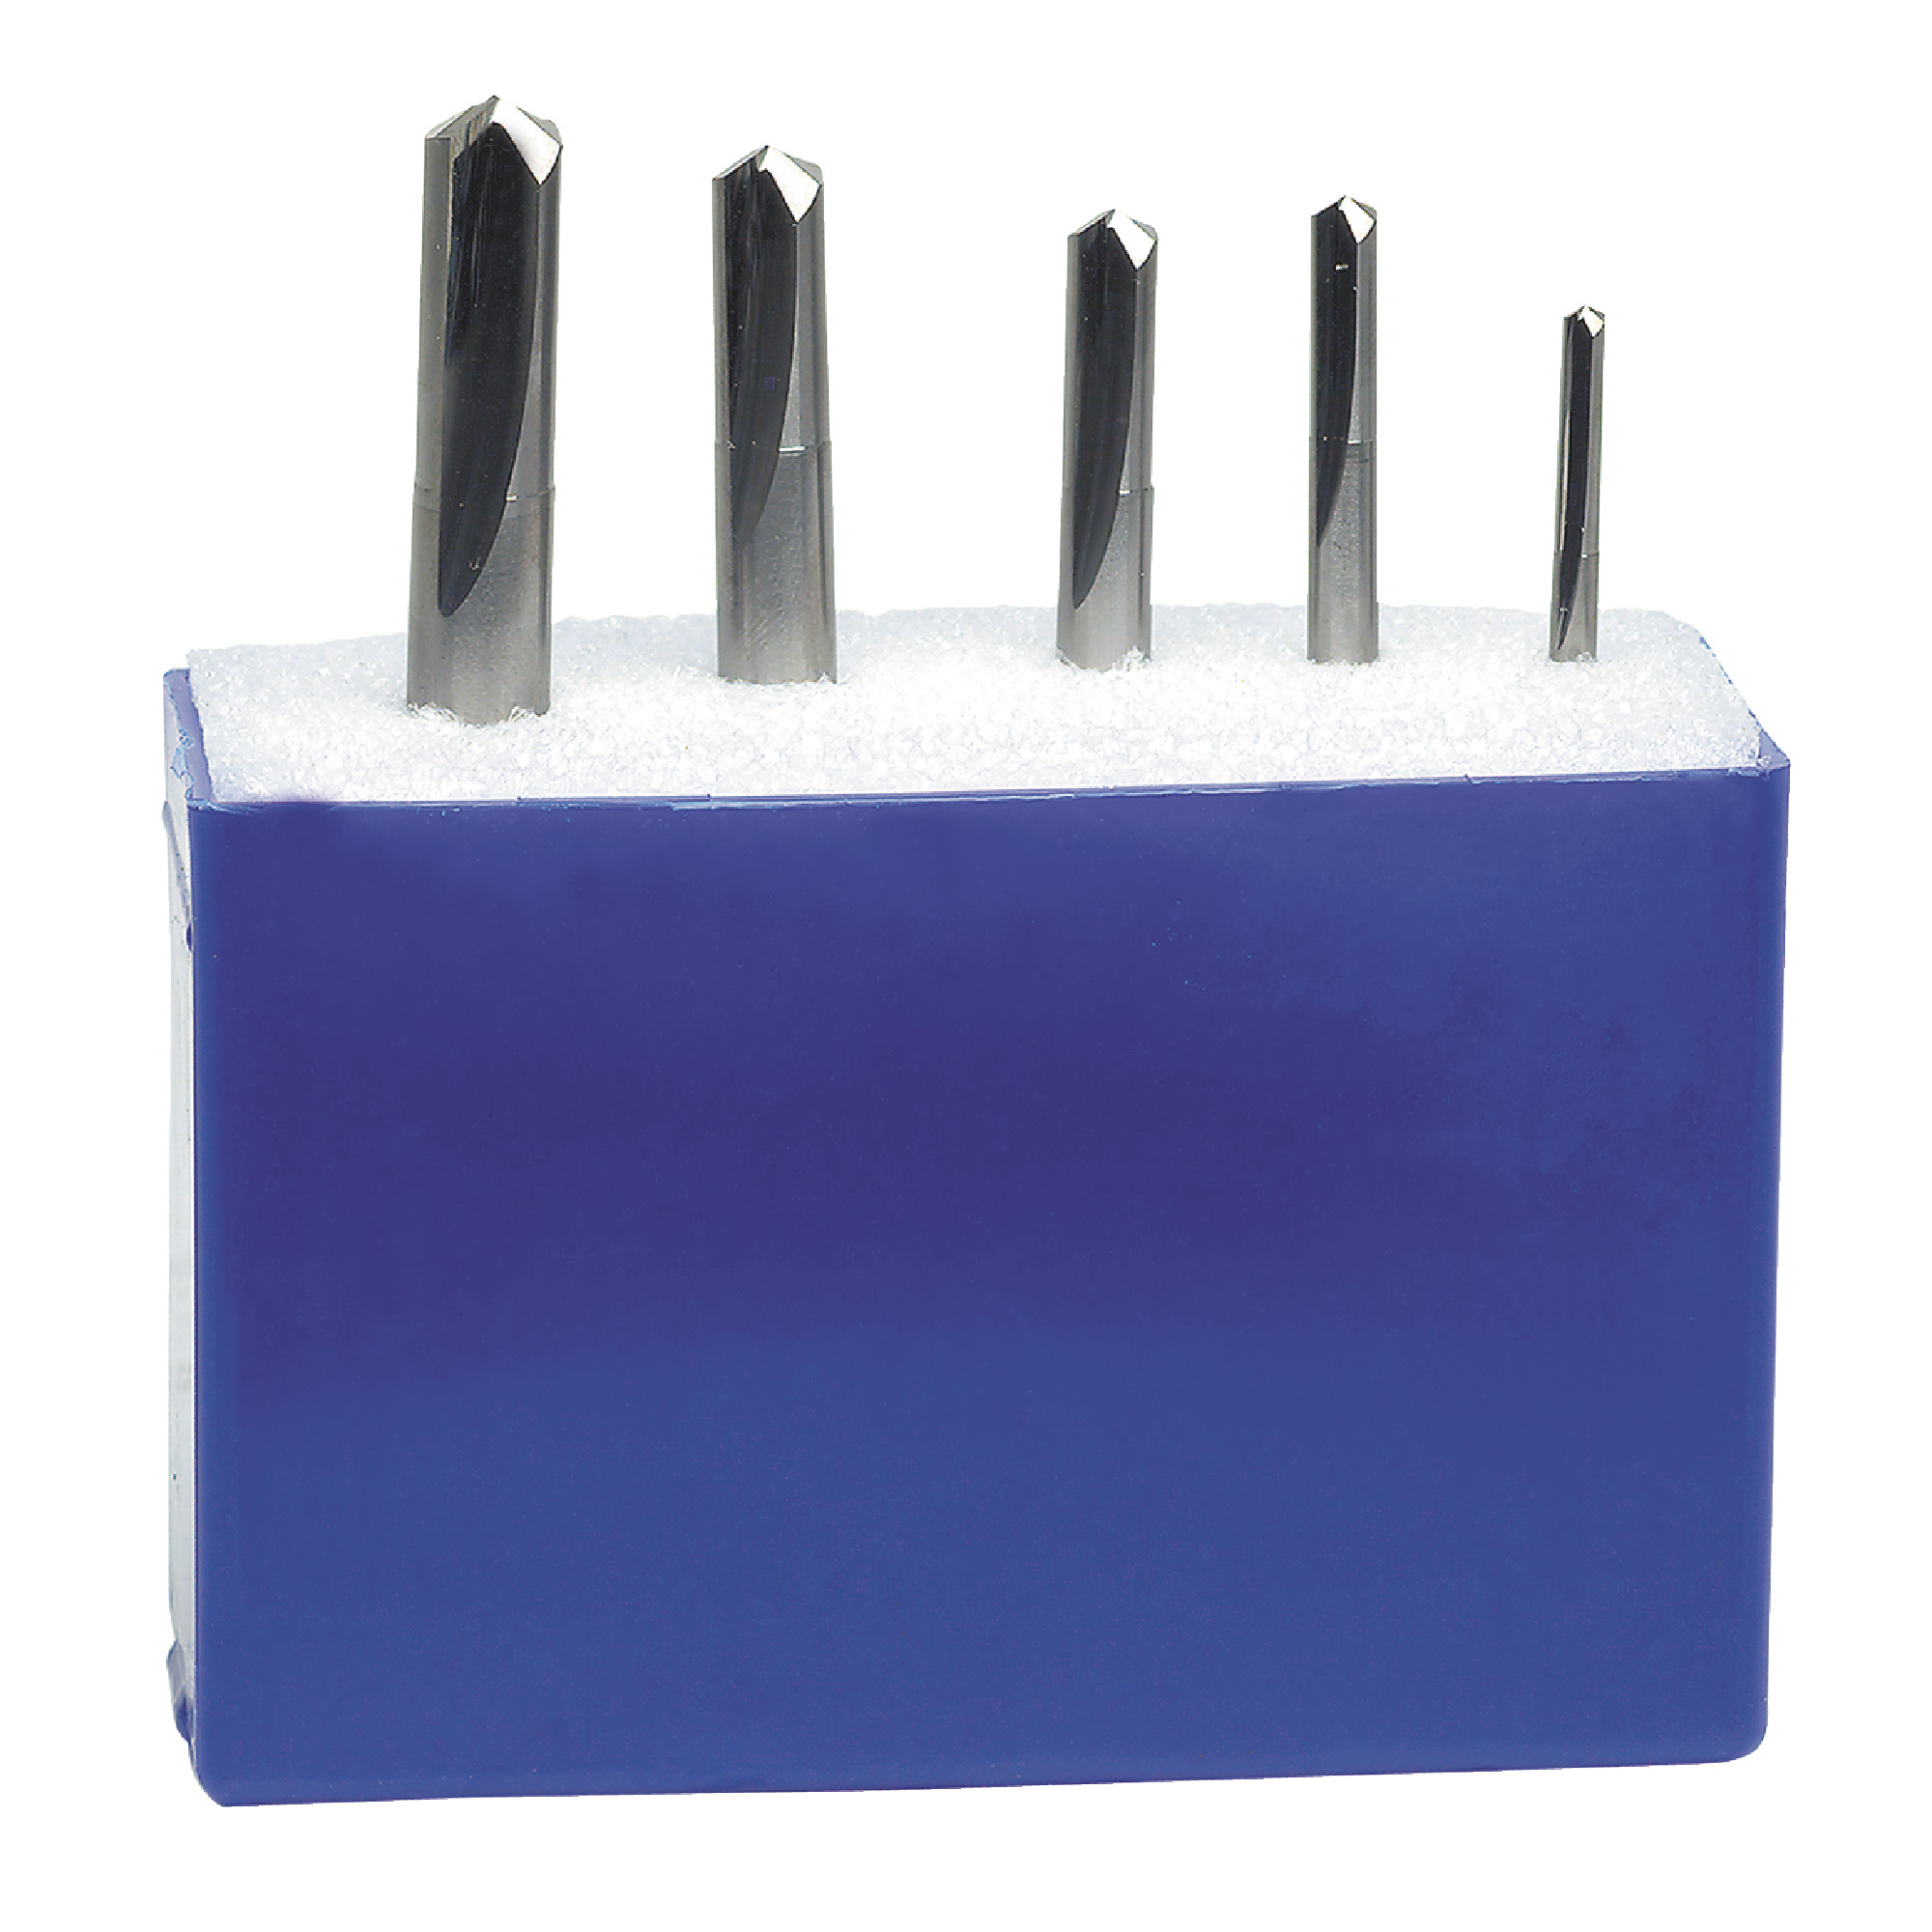 Solid Carbide Straight Flute Drills